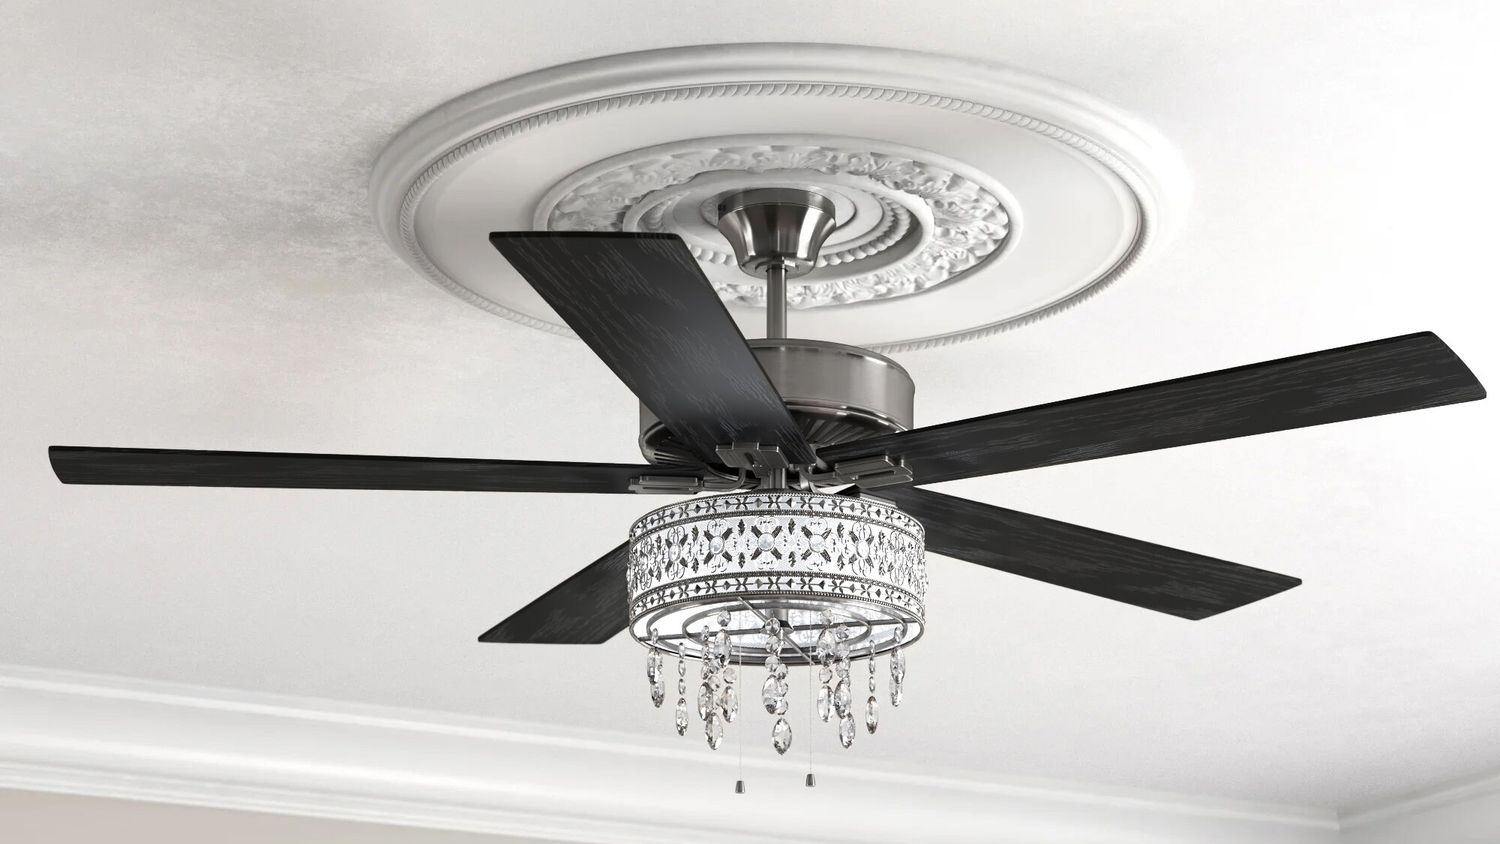 The 10 Best Ceiling Fans In 2021 According To Reviews Real Simple - Best 60 Ceiling Fan With Light